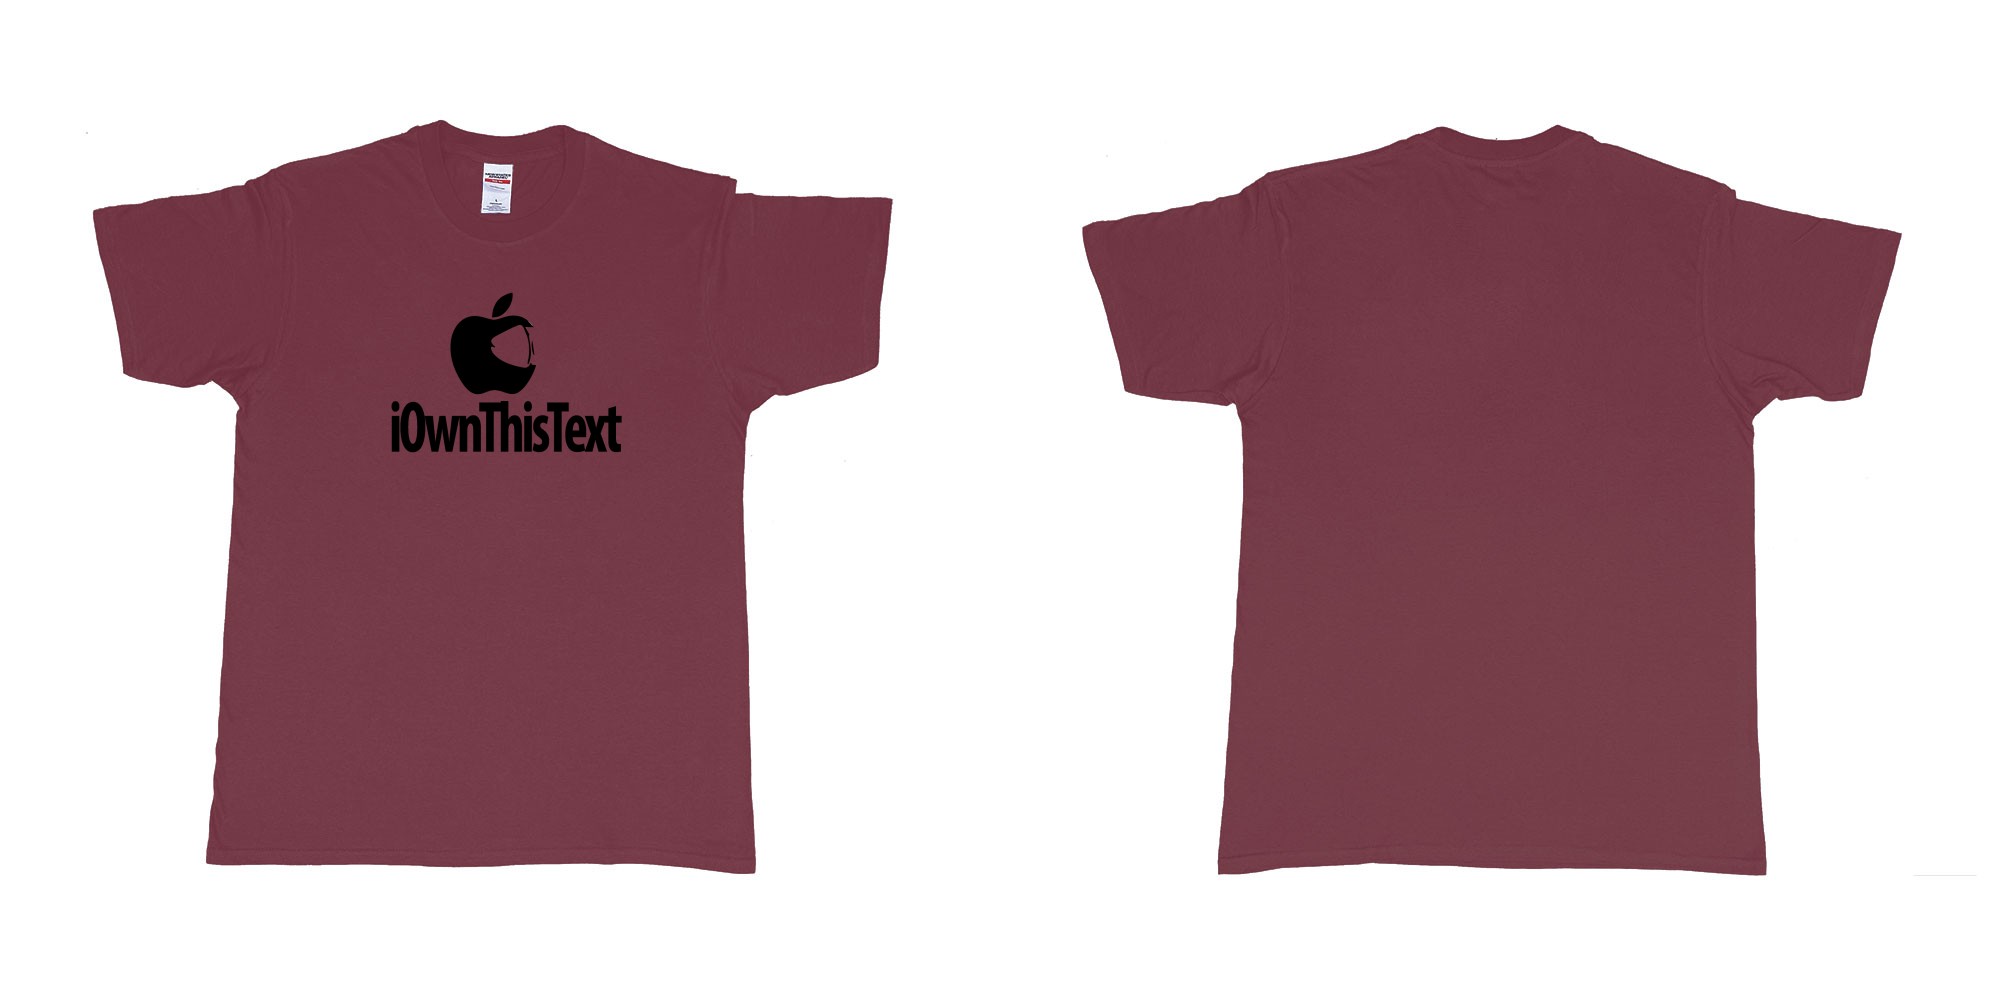 Custom tshirt design Iwanker in fabric color marron choice your own text made in Bali by The Pirate Way